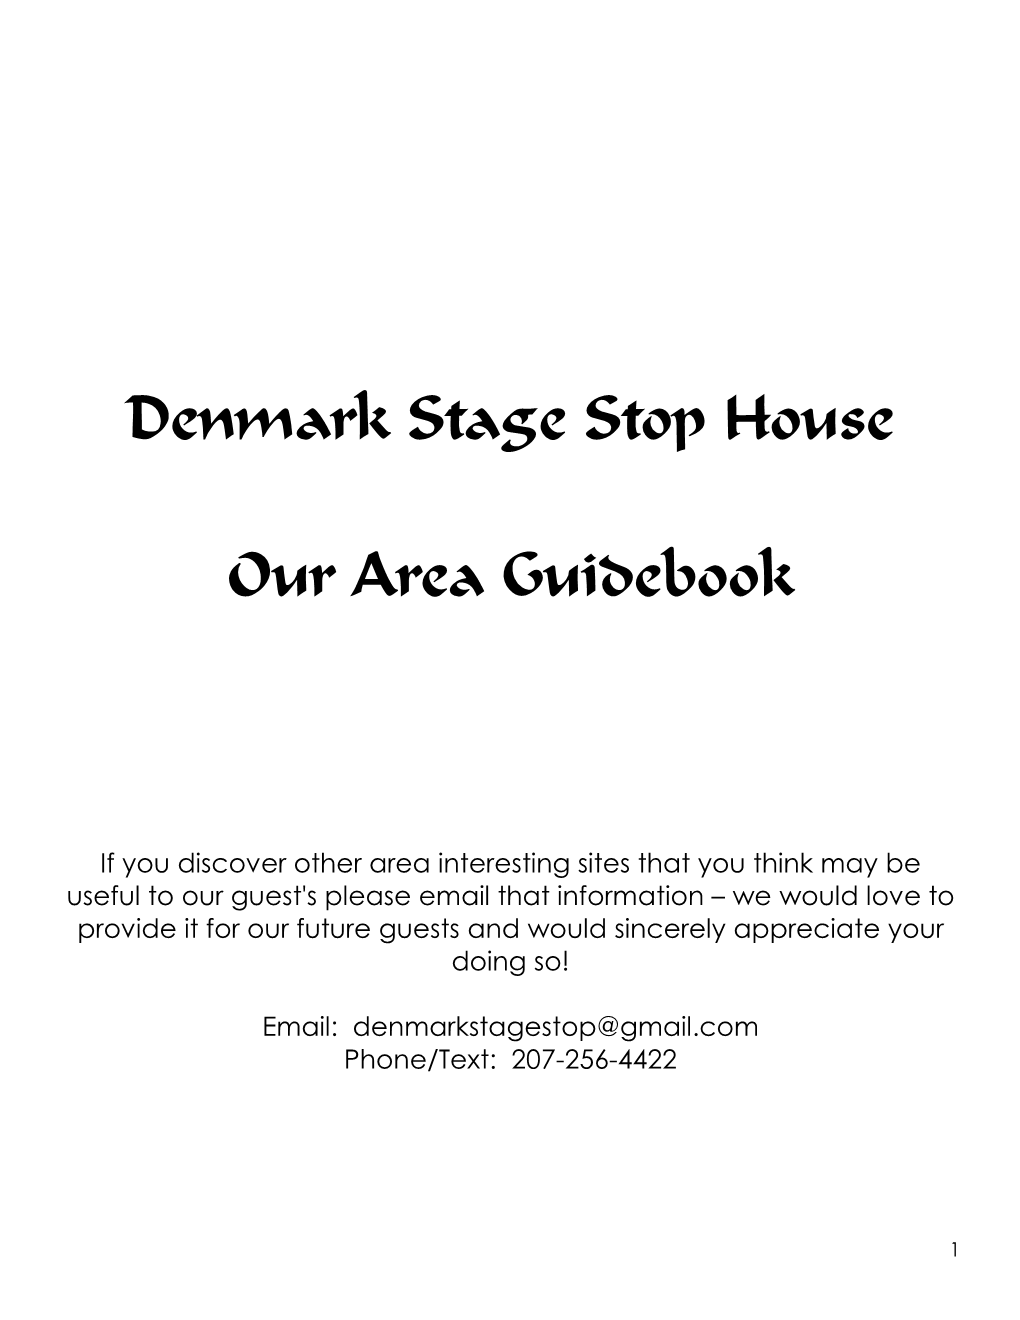 Denmark Stage Stop House Our Area Guidebook